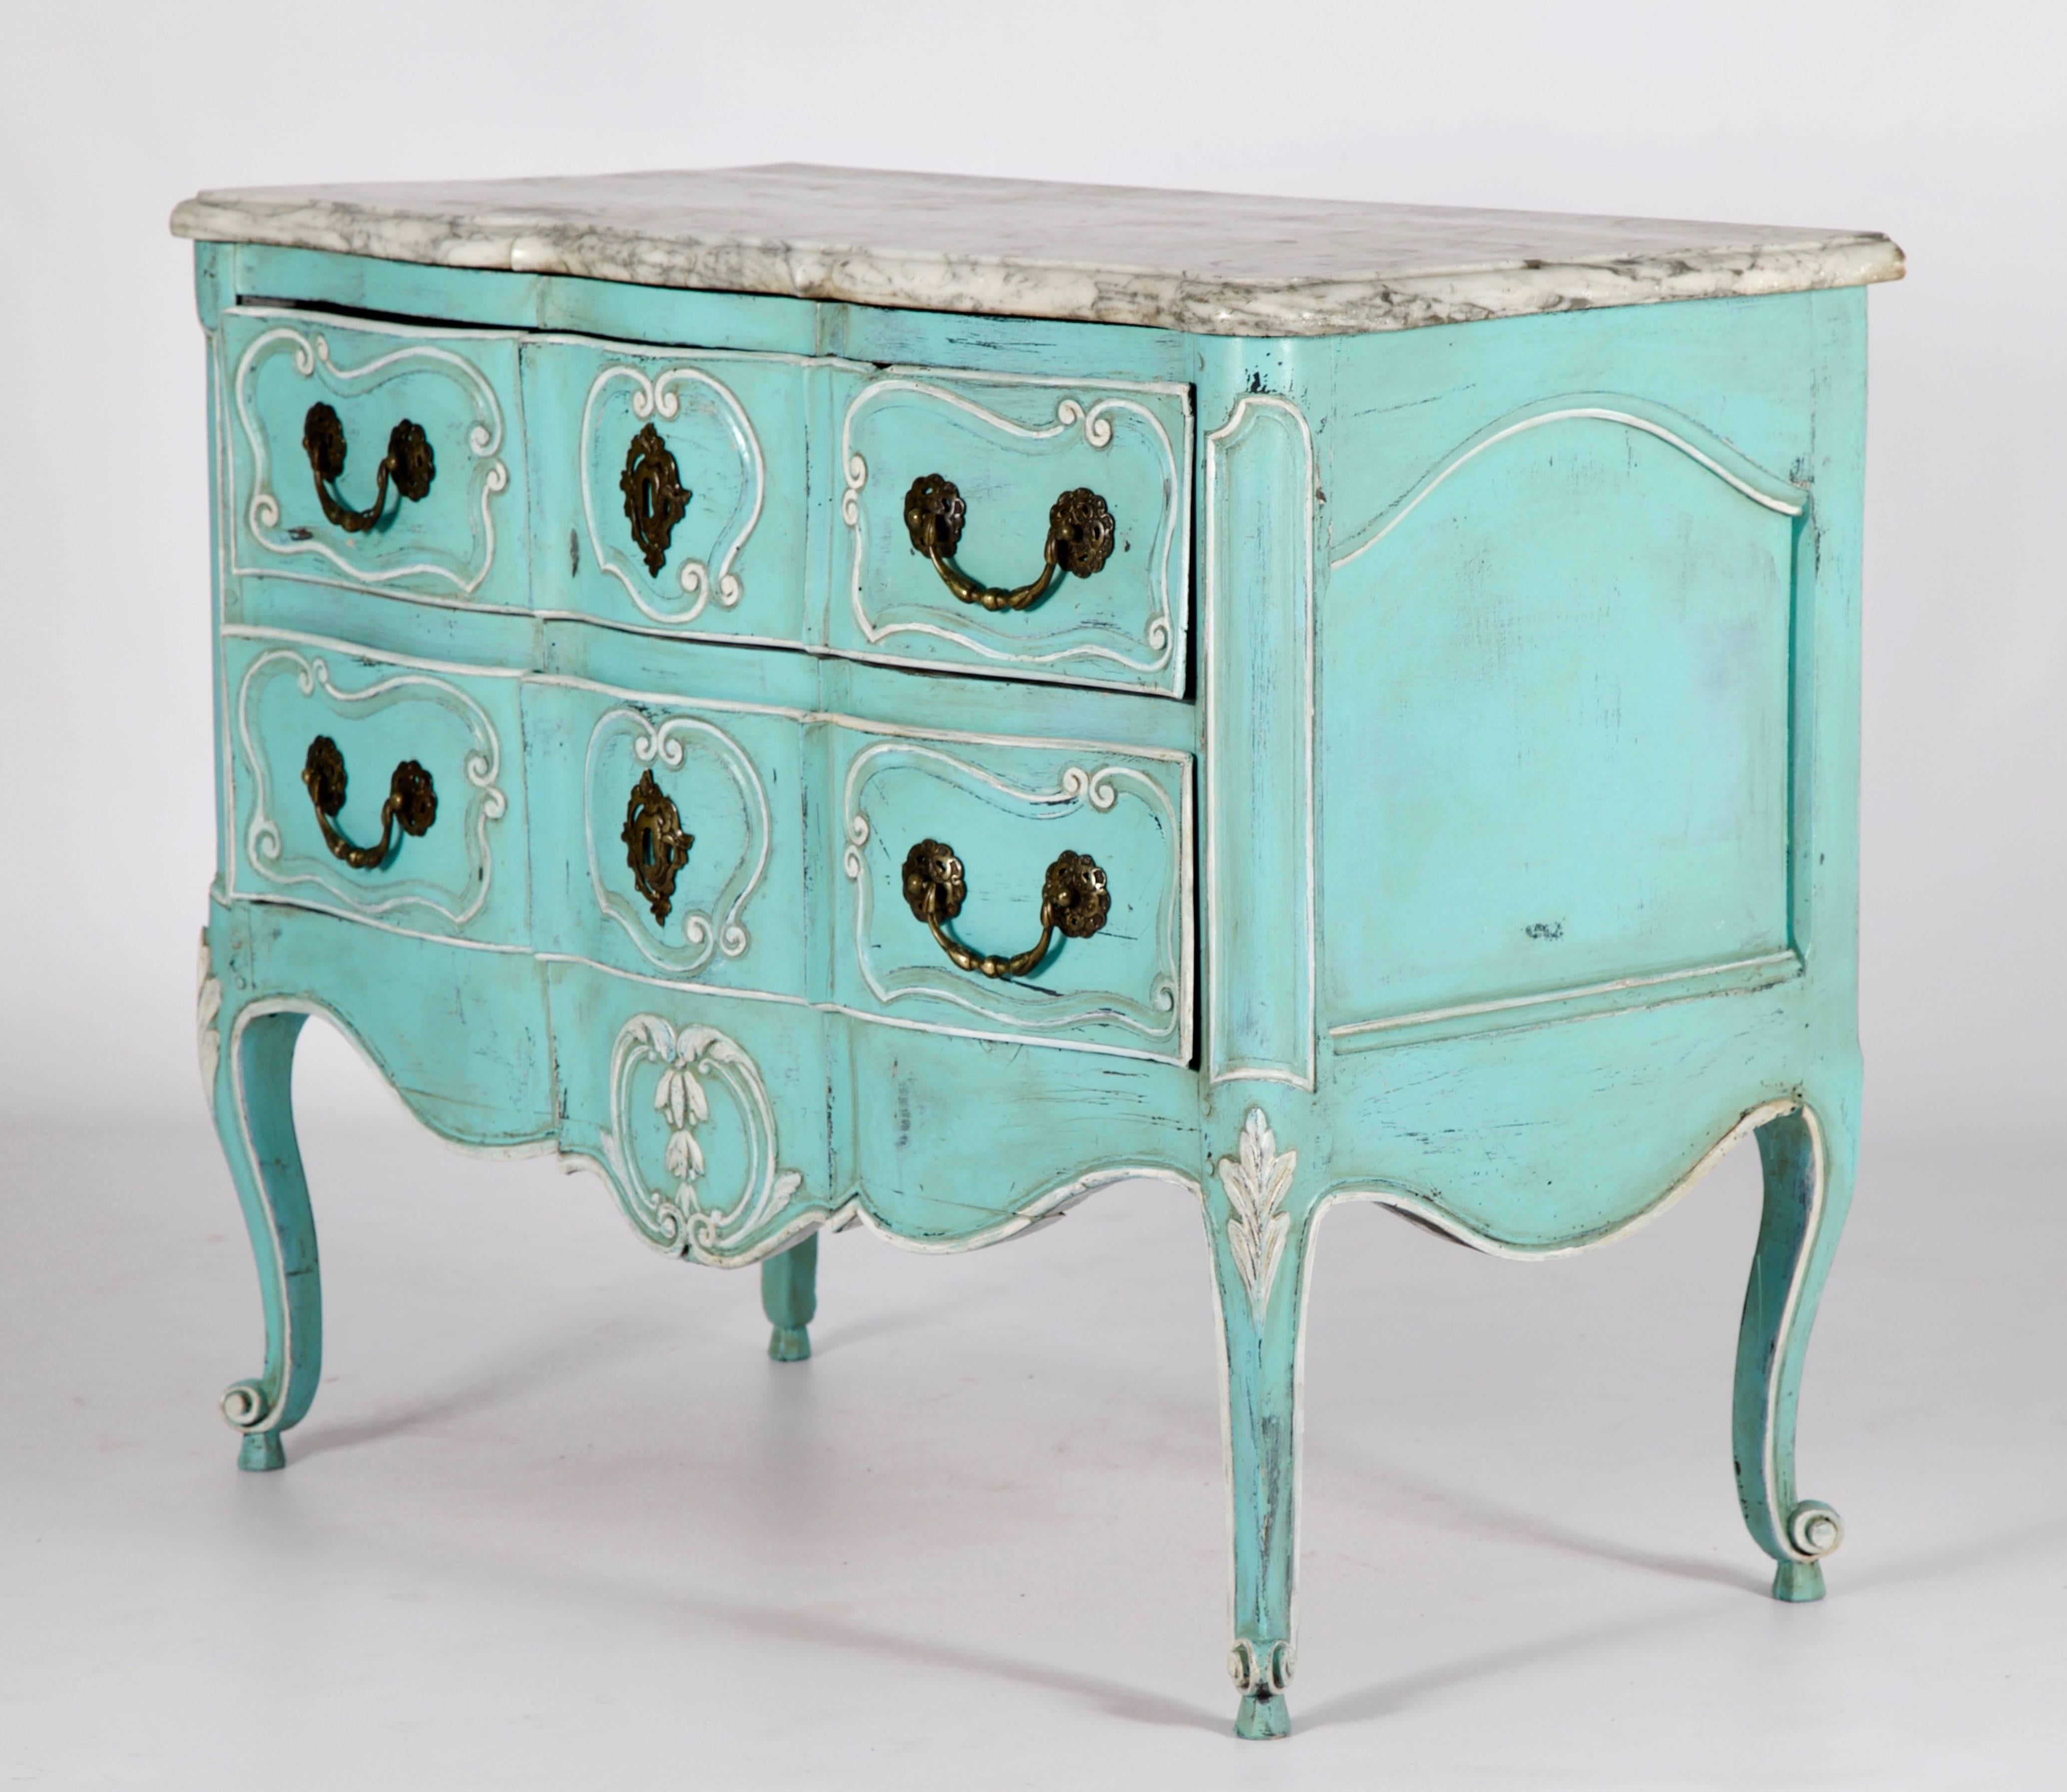 Early 19th century Louis XV style commode with Provençal carving. Finished in a turquoise patina with Ecru white highlights, aged and distressed. Topped with the original beveled and shaped Carrara marble of generous depth.